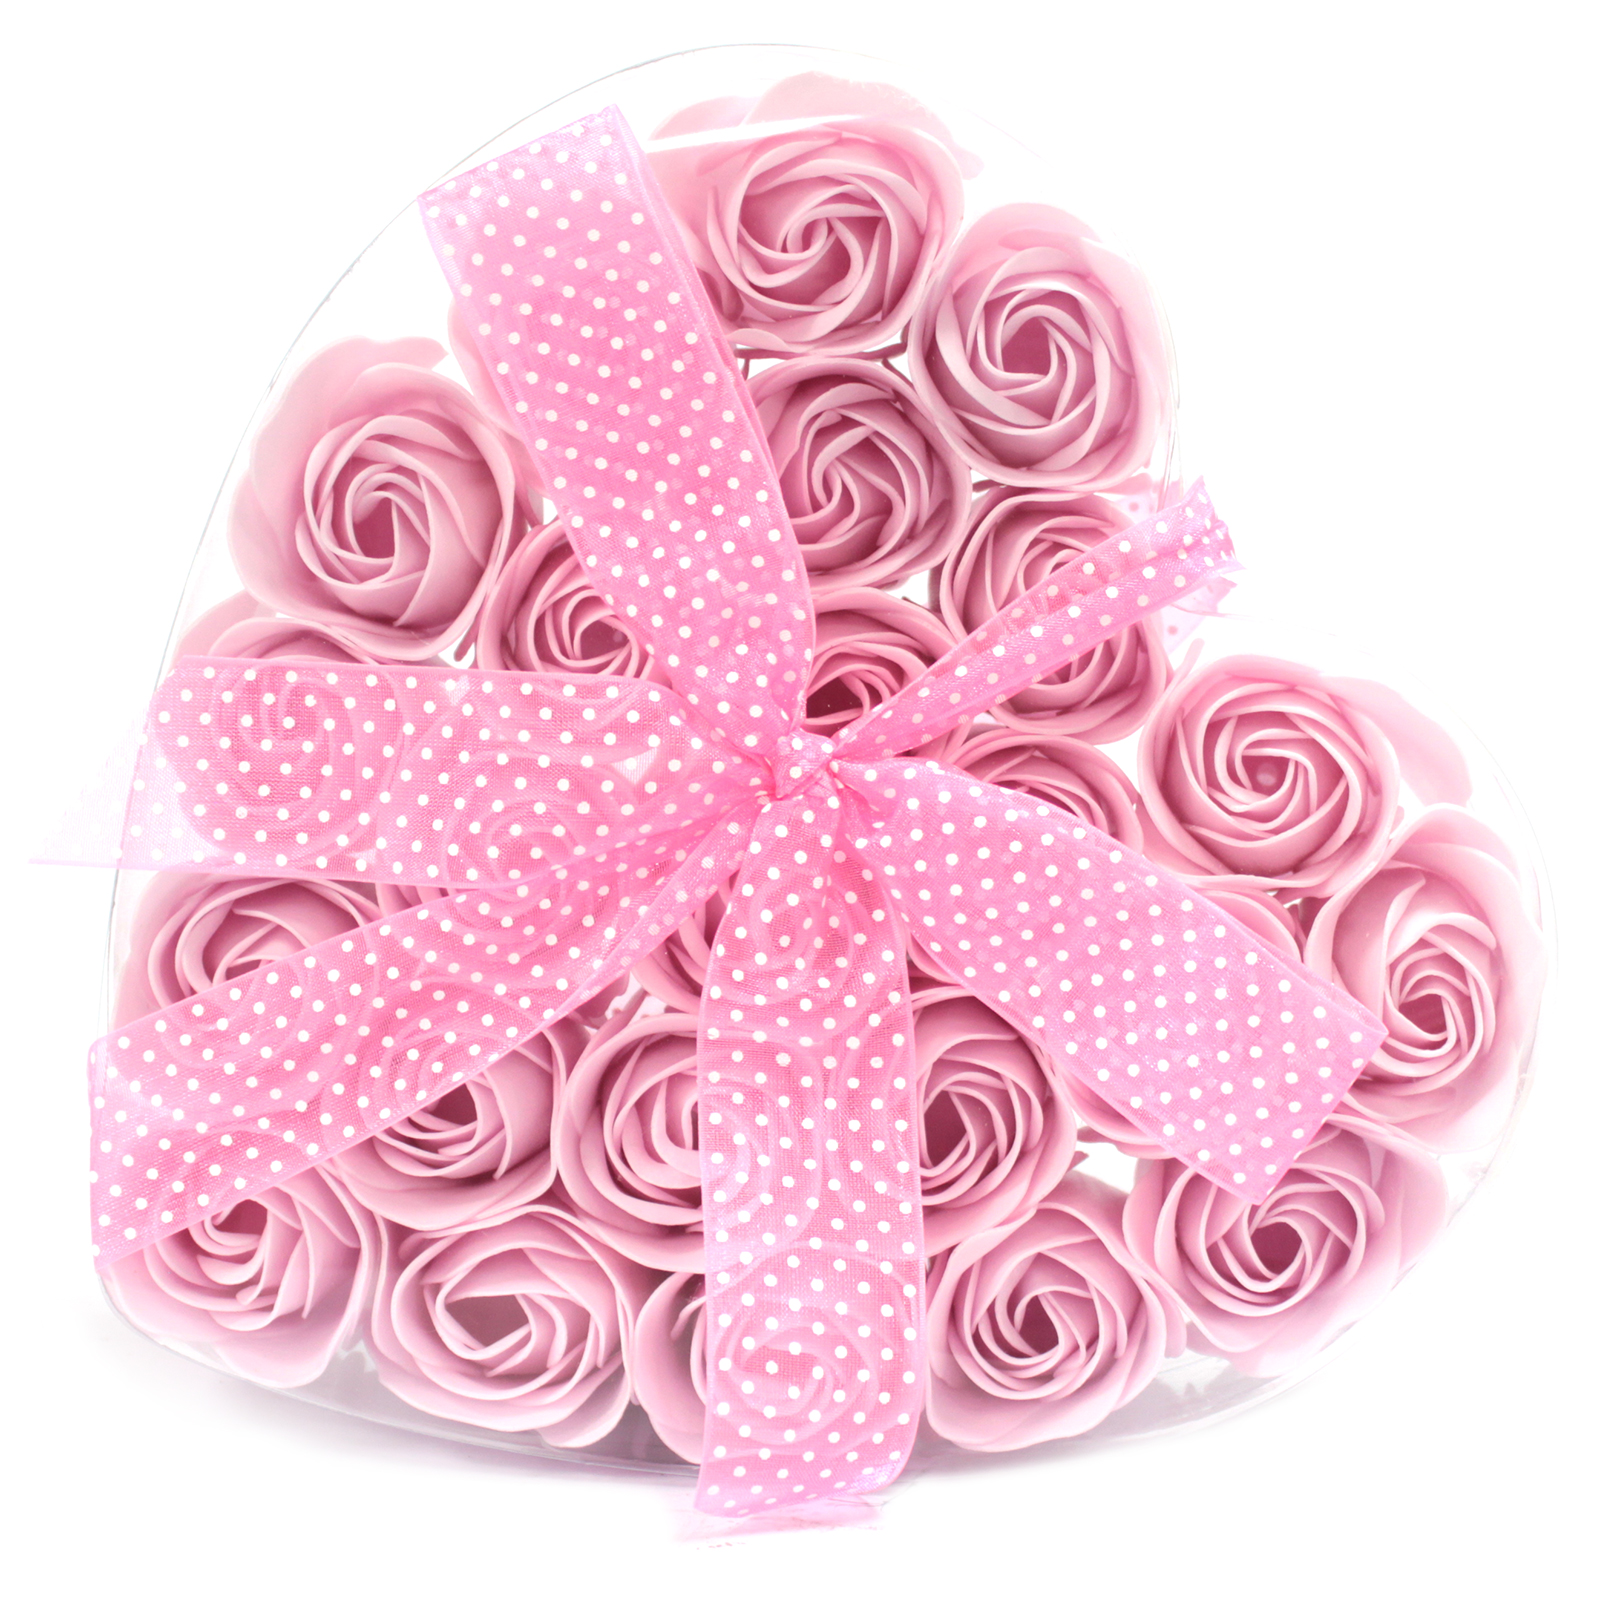 1x Set of 24 Soap Flower Heart Box - Pink Roses